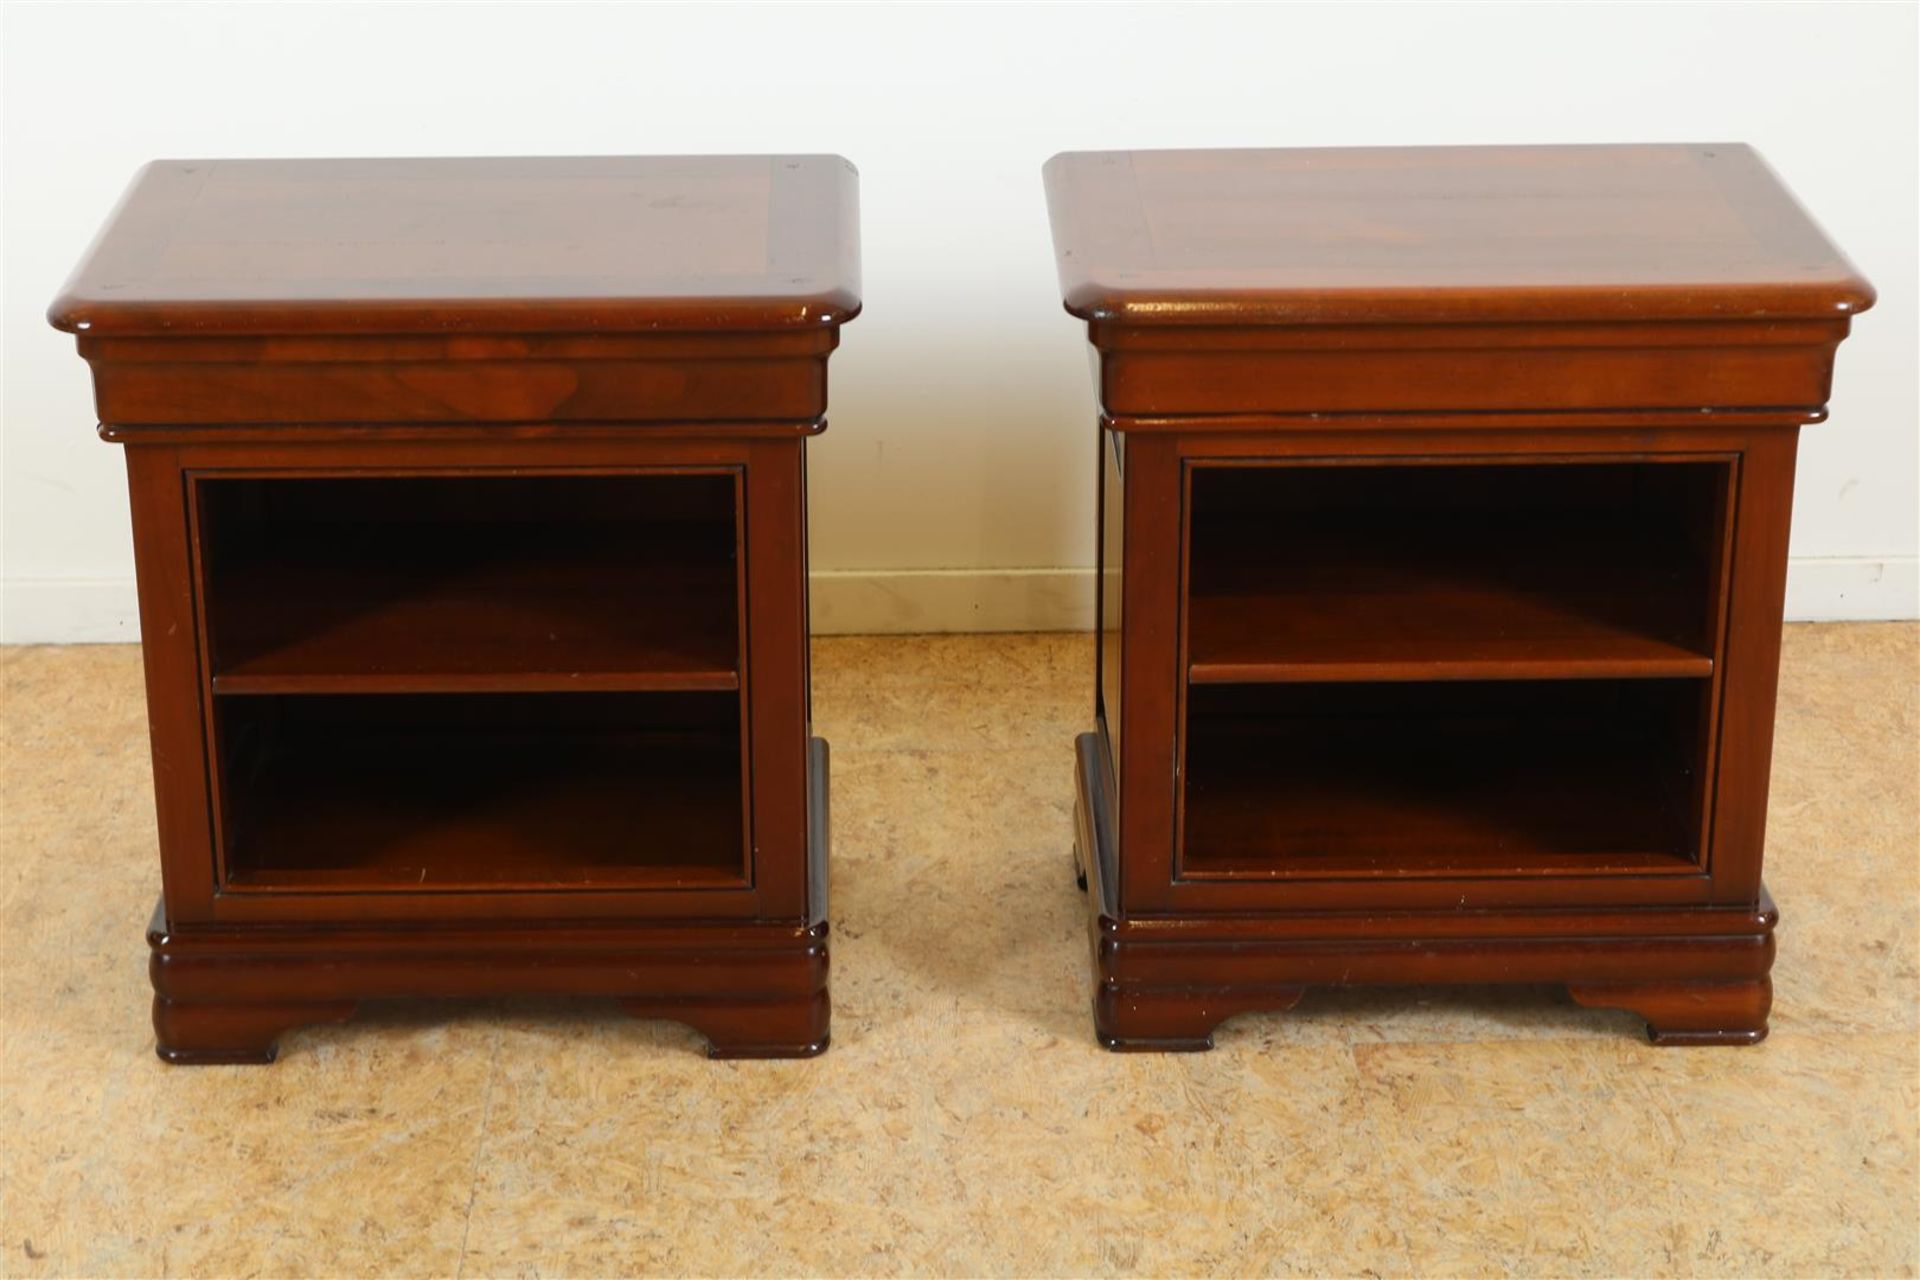 Set of cherry wood veneered bedside tables with drawer, h. 55, w. 53, d. 37 cm.